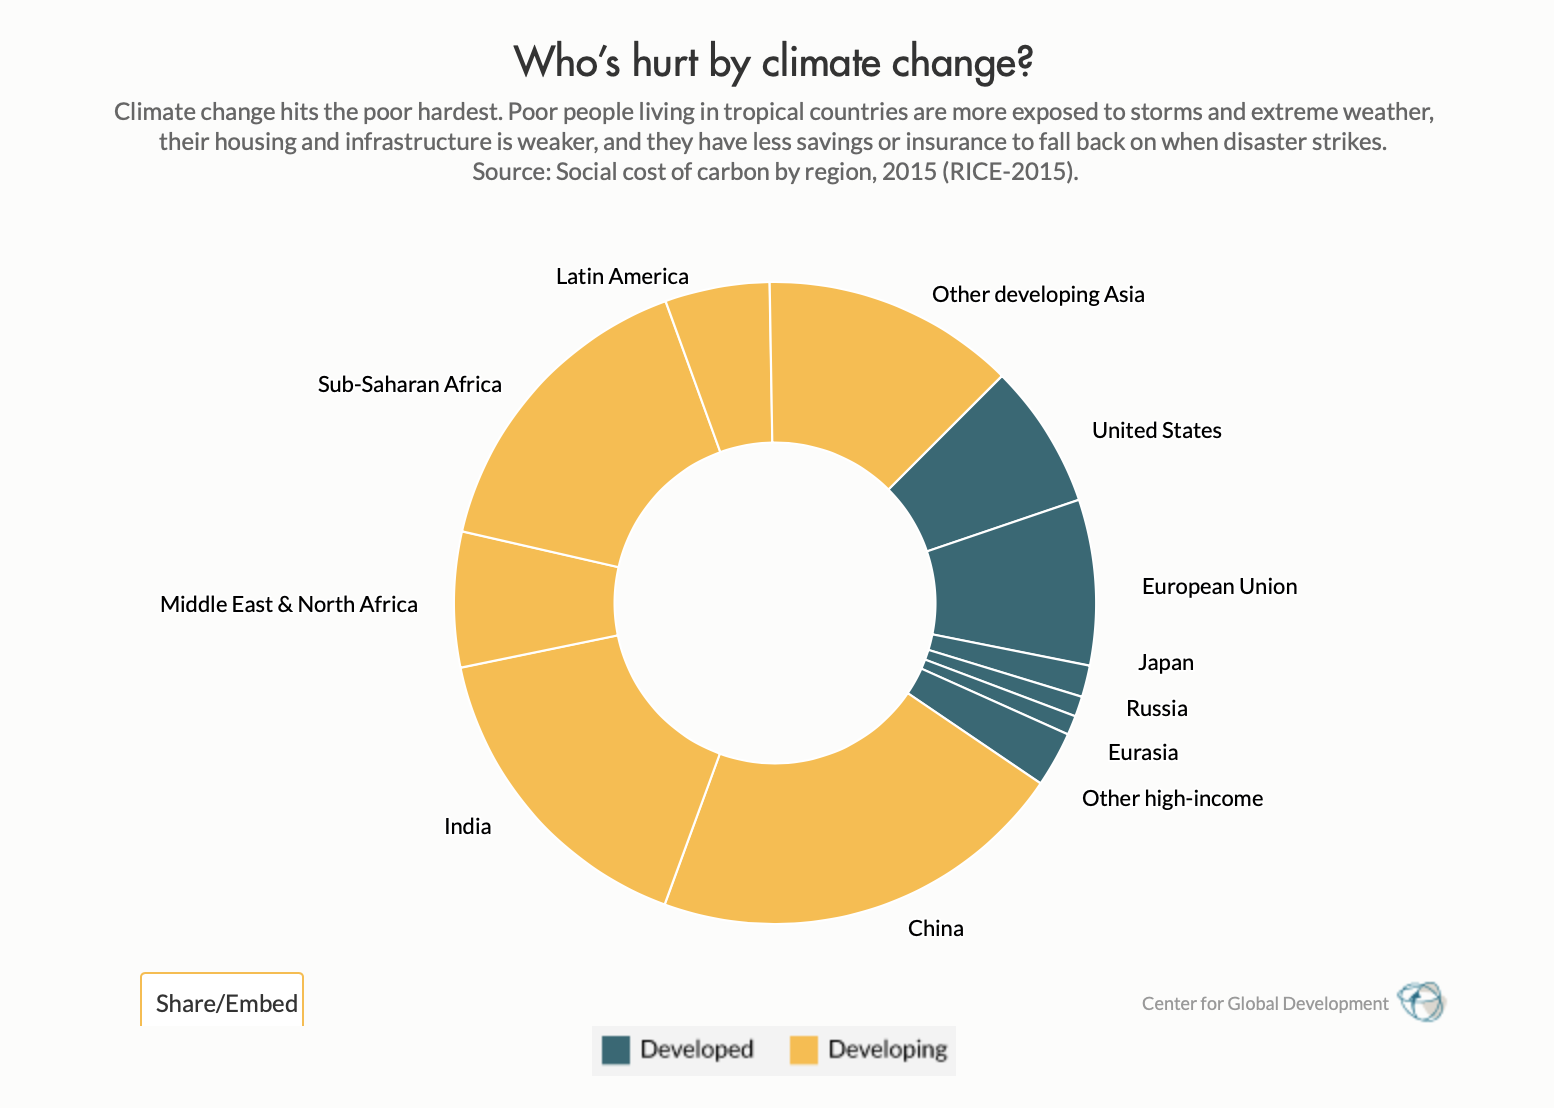 Who is hurt by climate change? Source: CGD (2015)